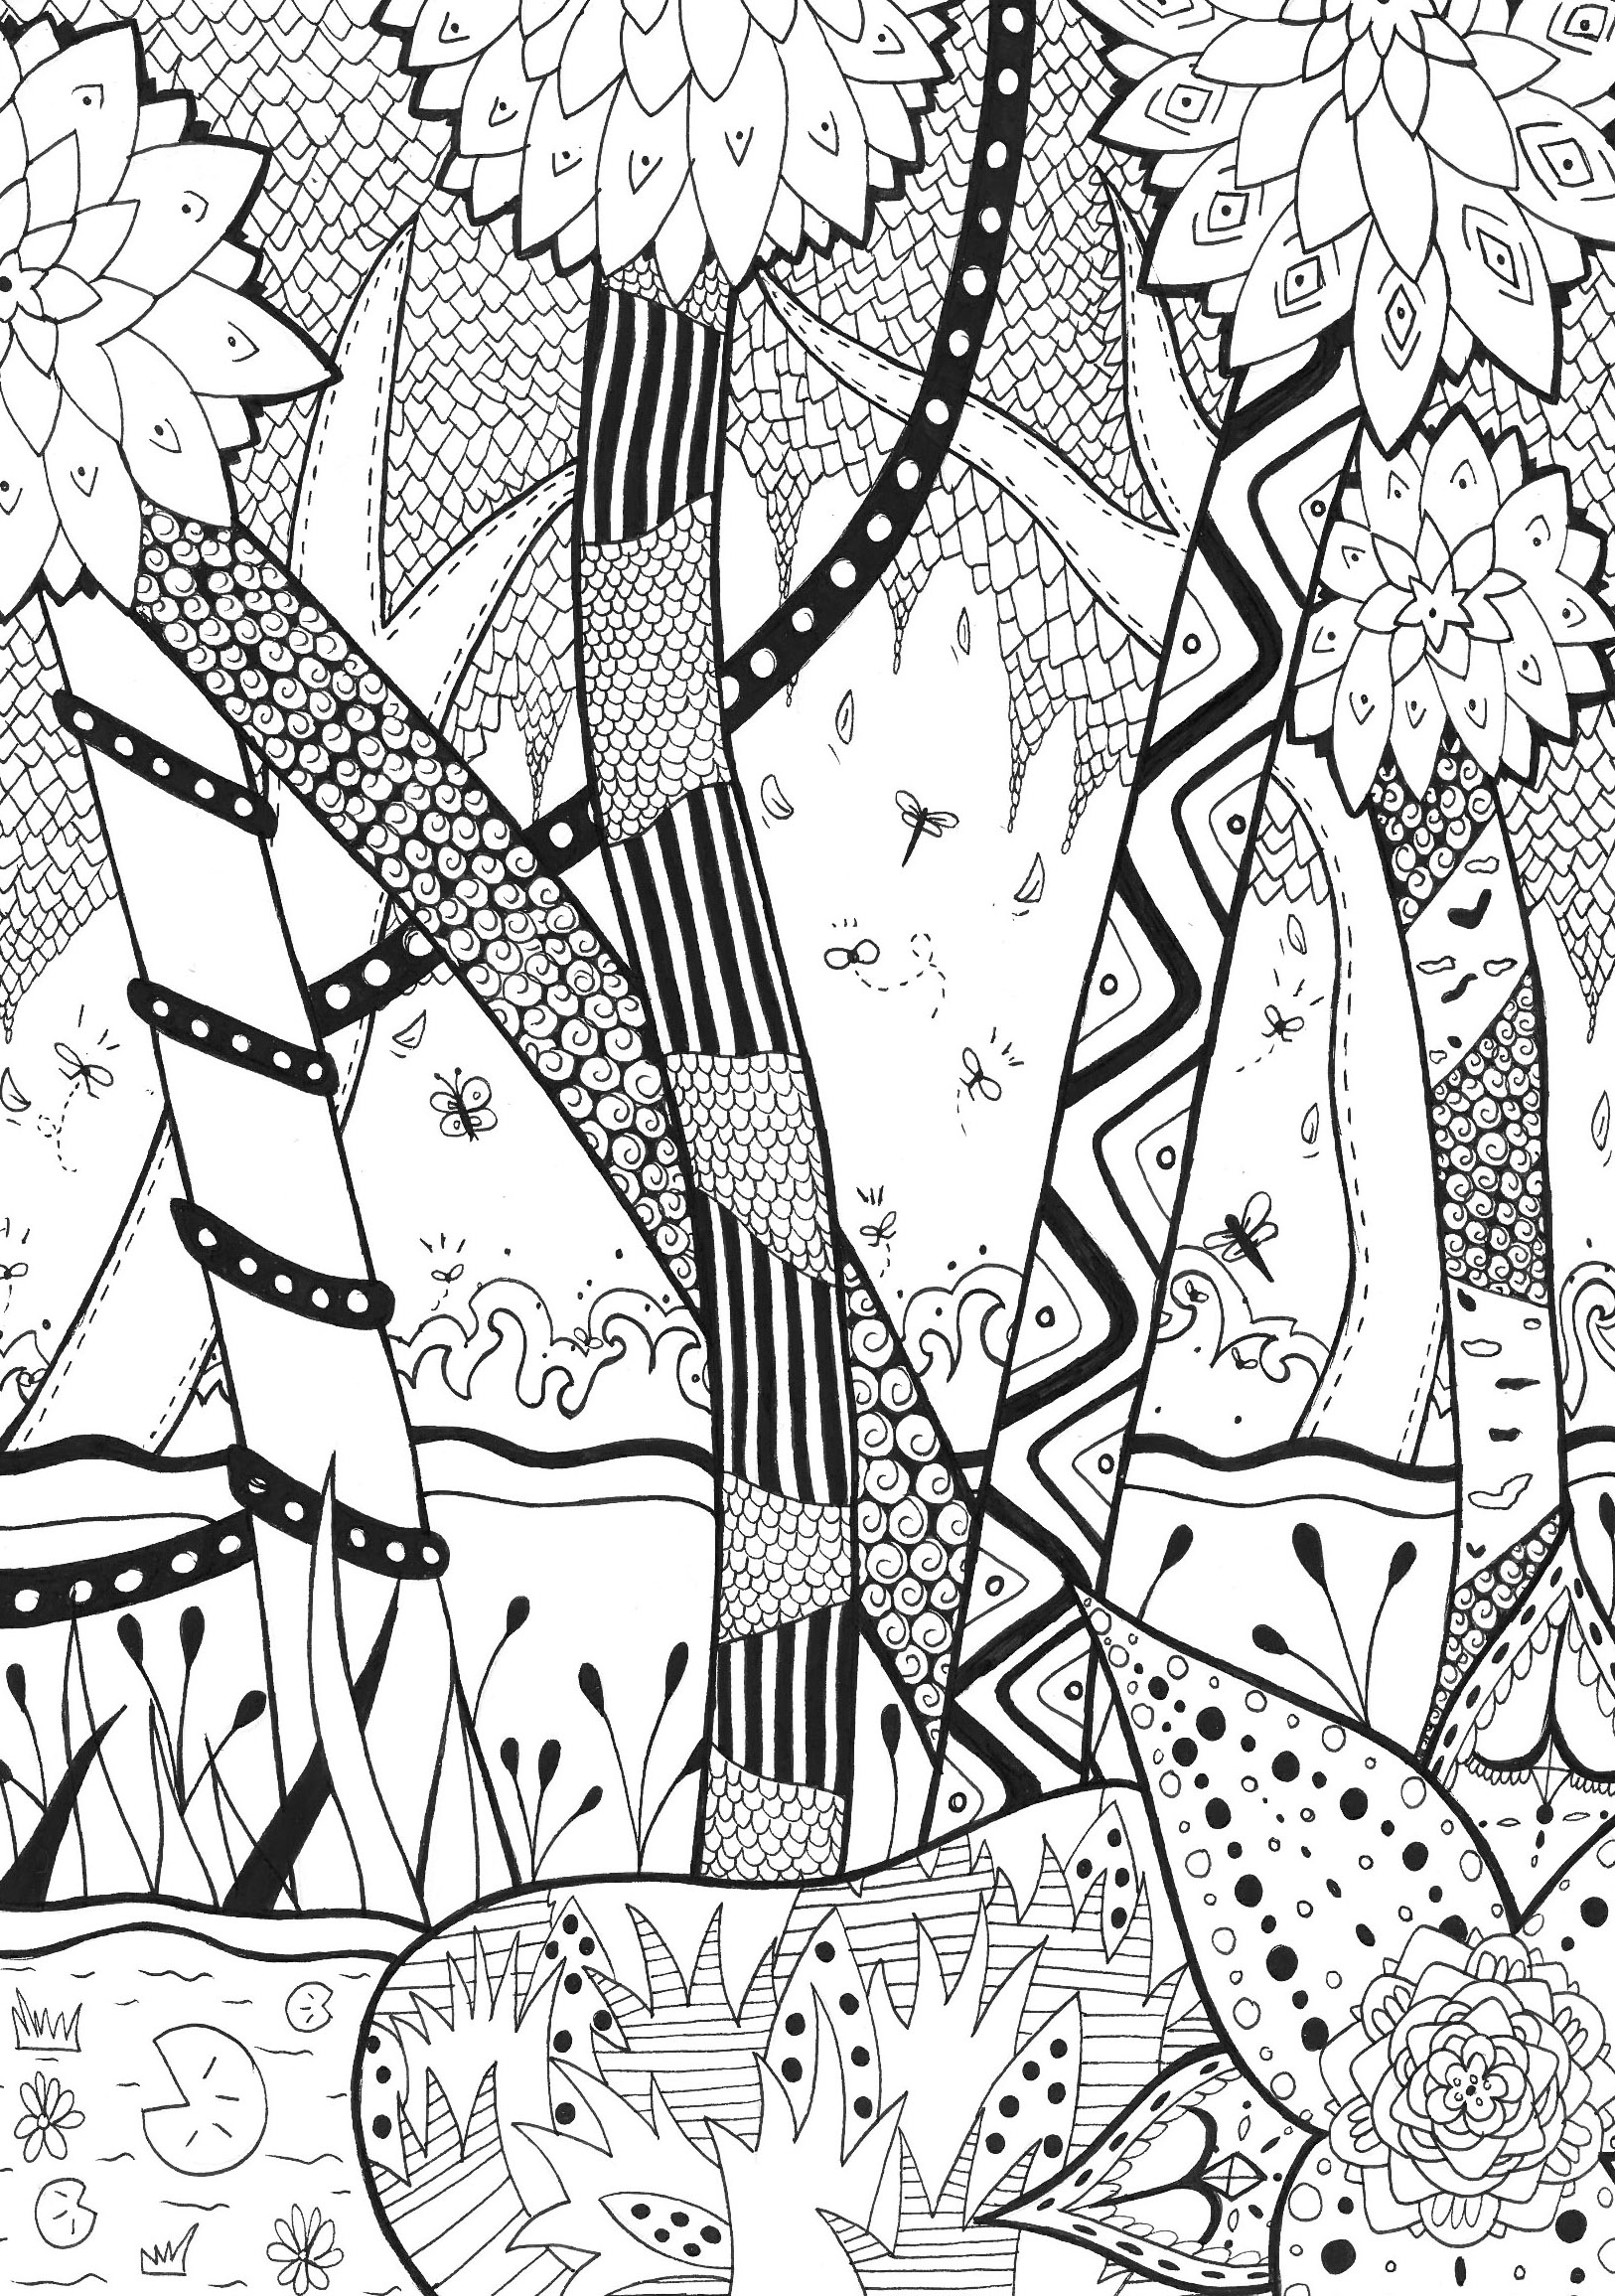 Enter in the magical forest of Zentangle for a coloring page time !